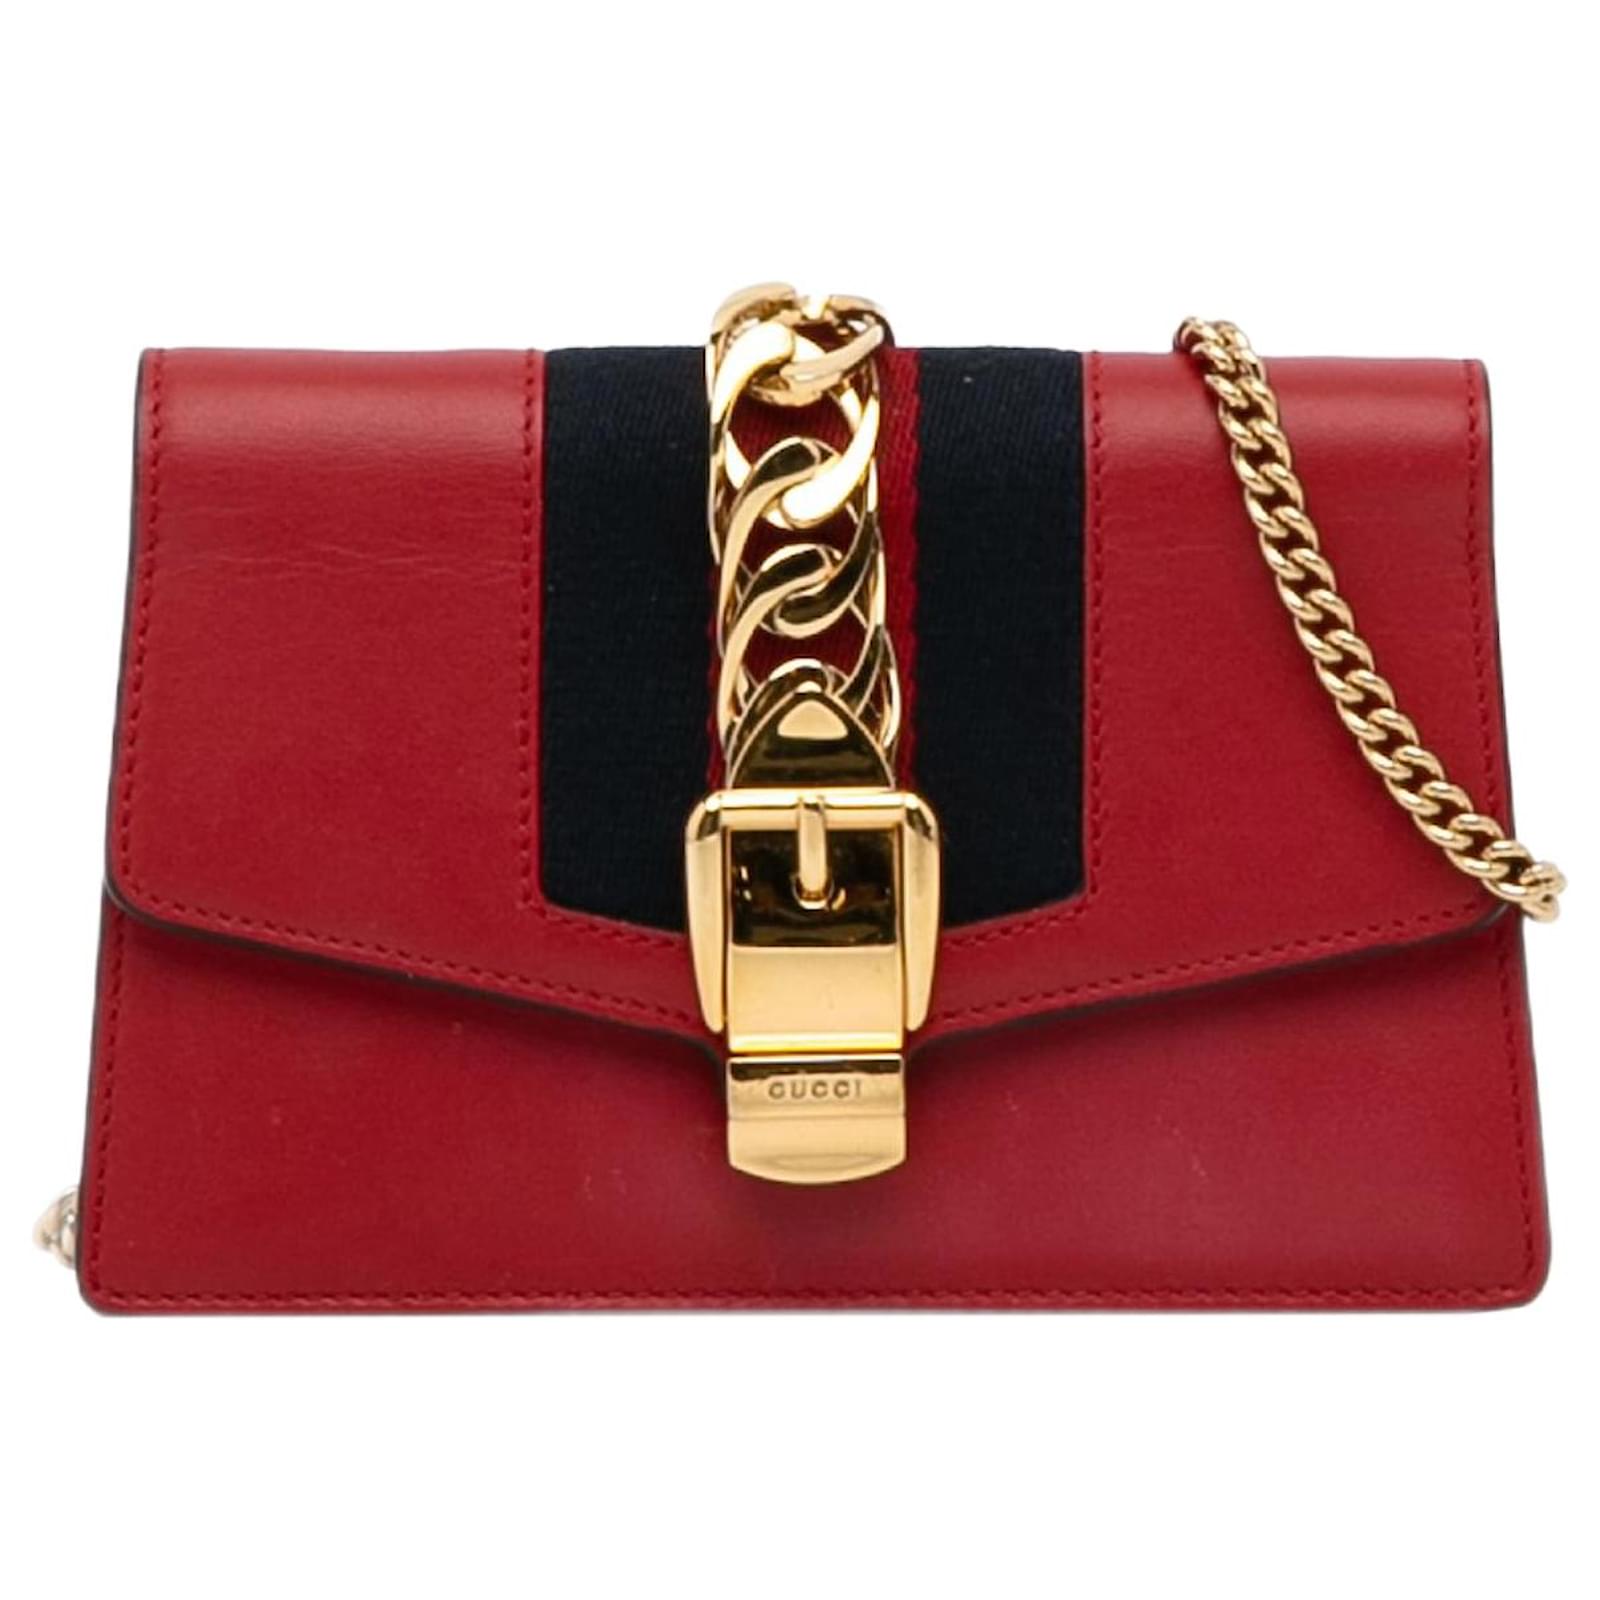 Gucci, Bags, Gucci Handbag Red With Gold Chains